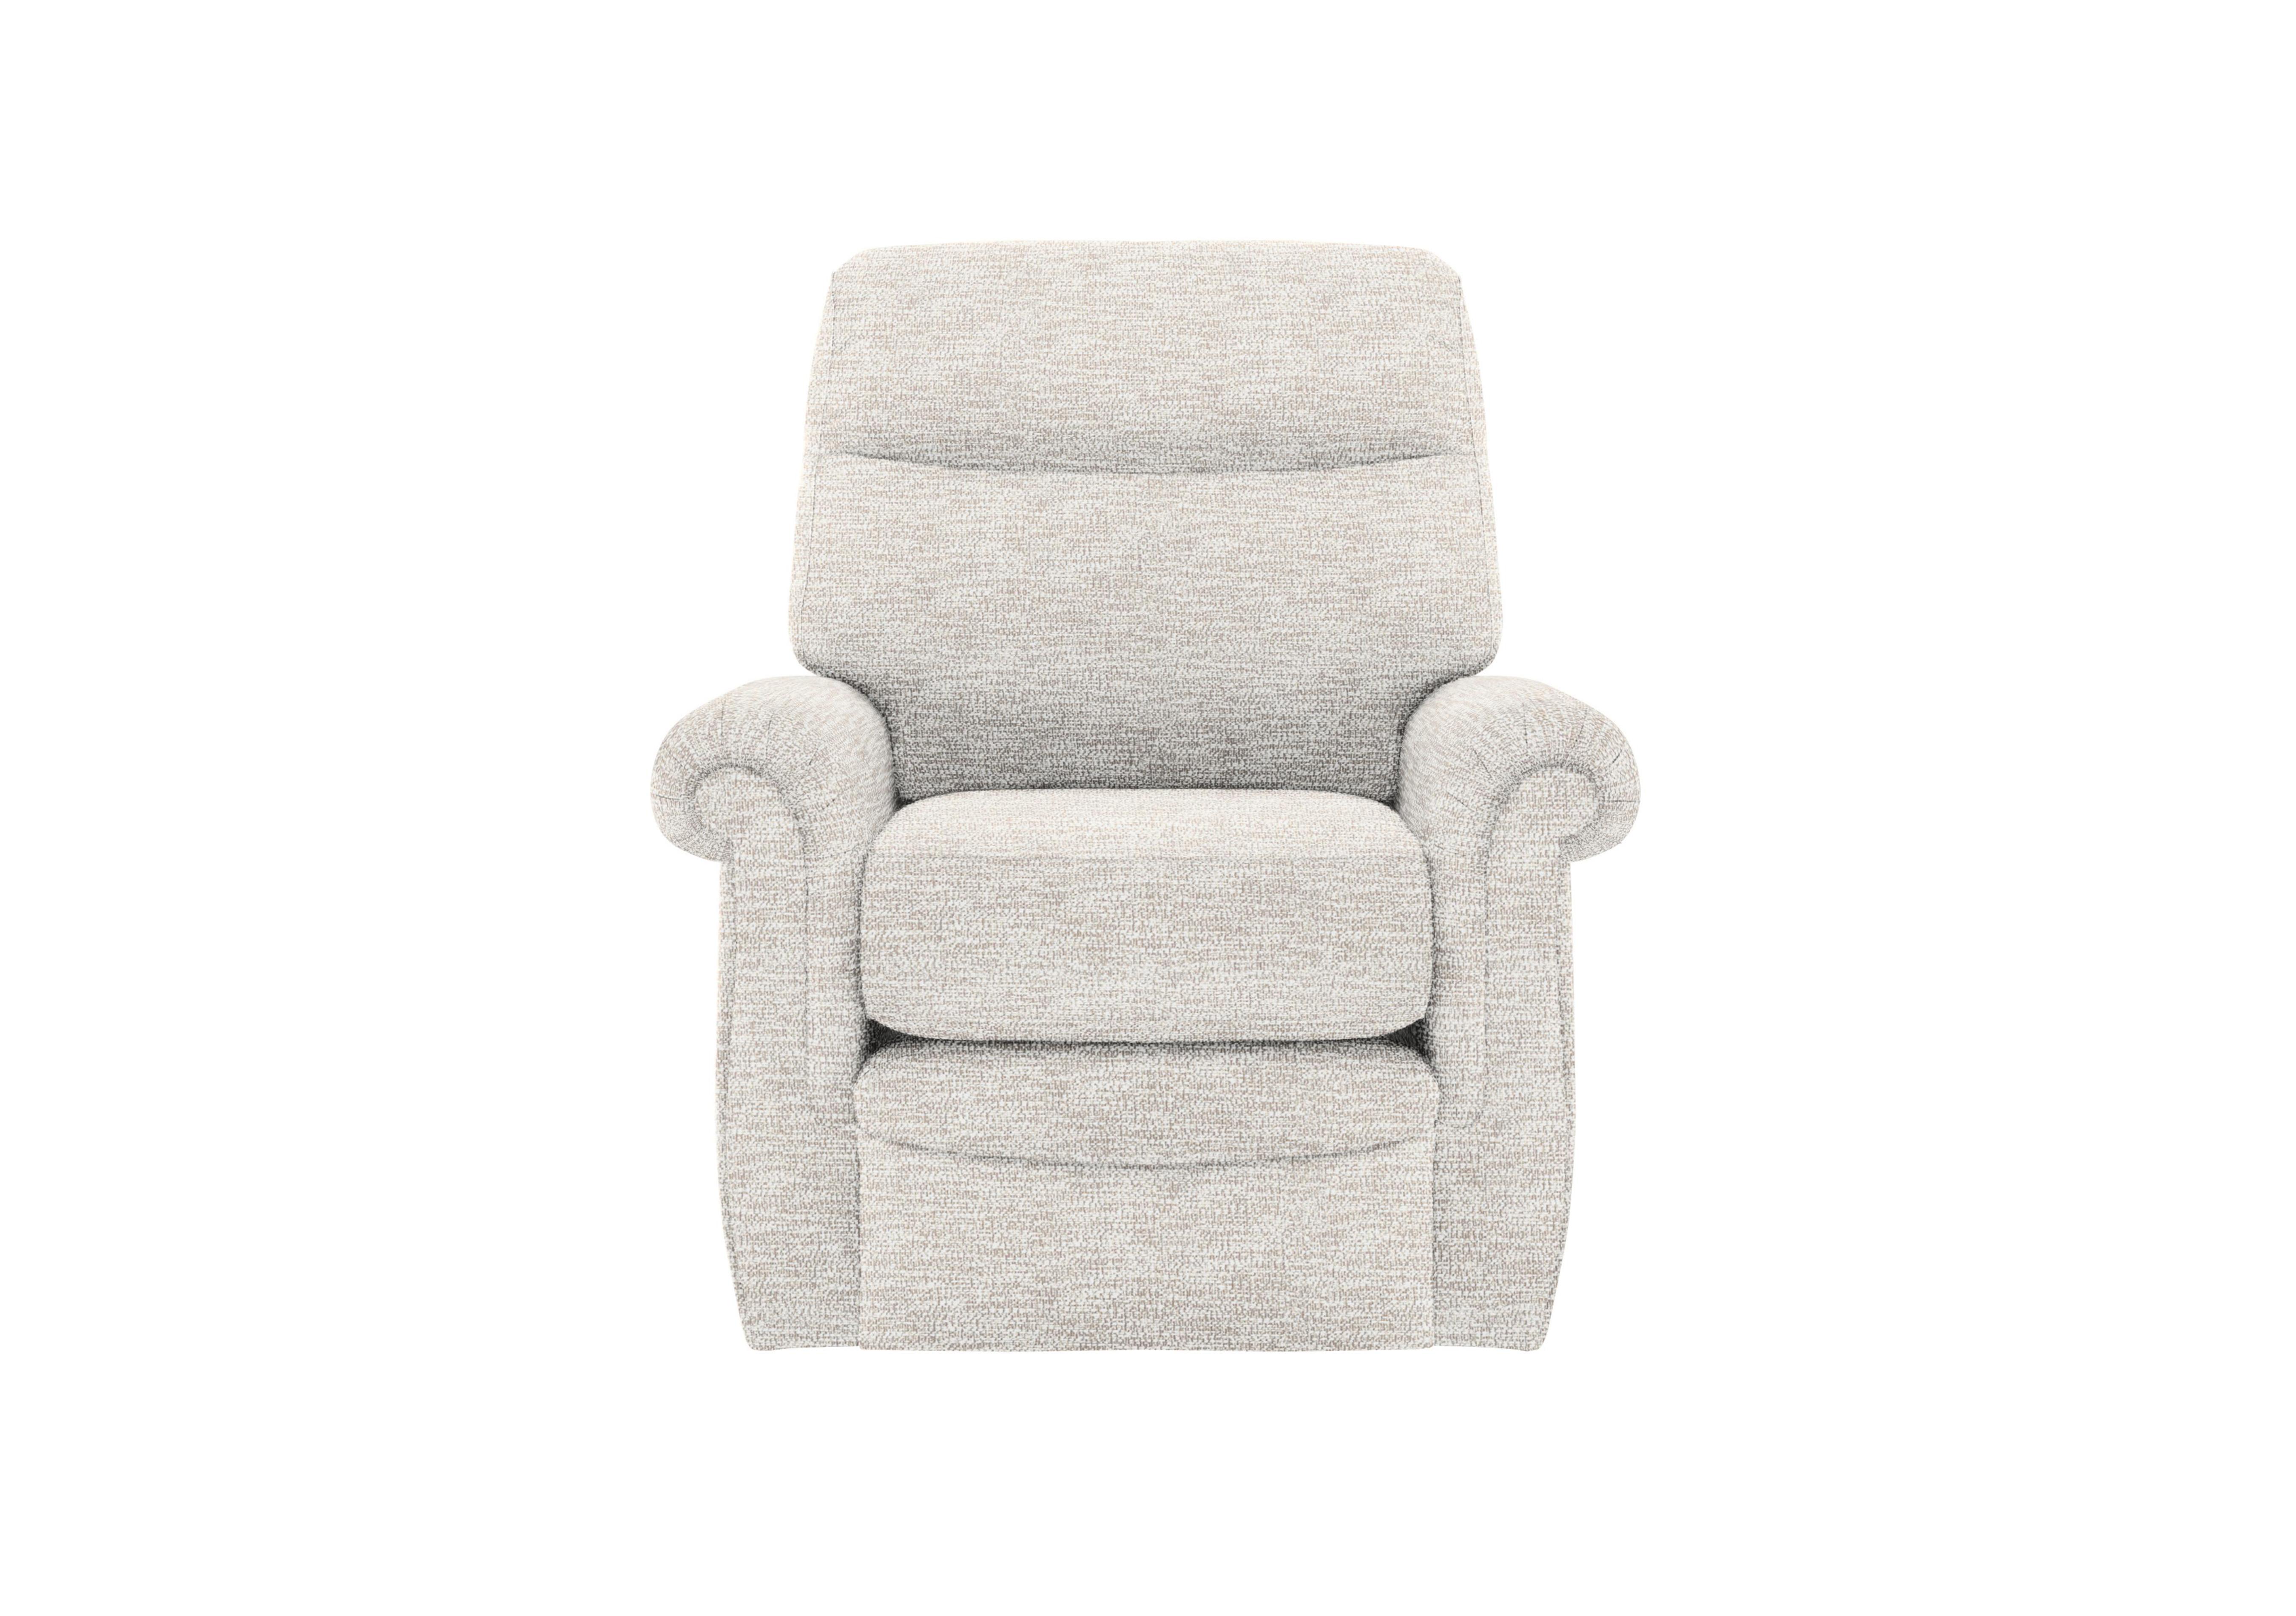 Avon Fabric Lift and Rise Armchair in C931 Rush Cream on Furniture Village